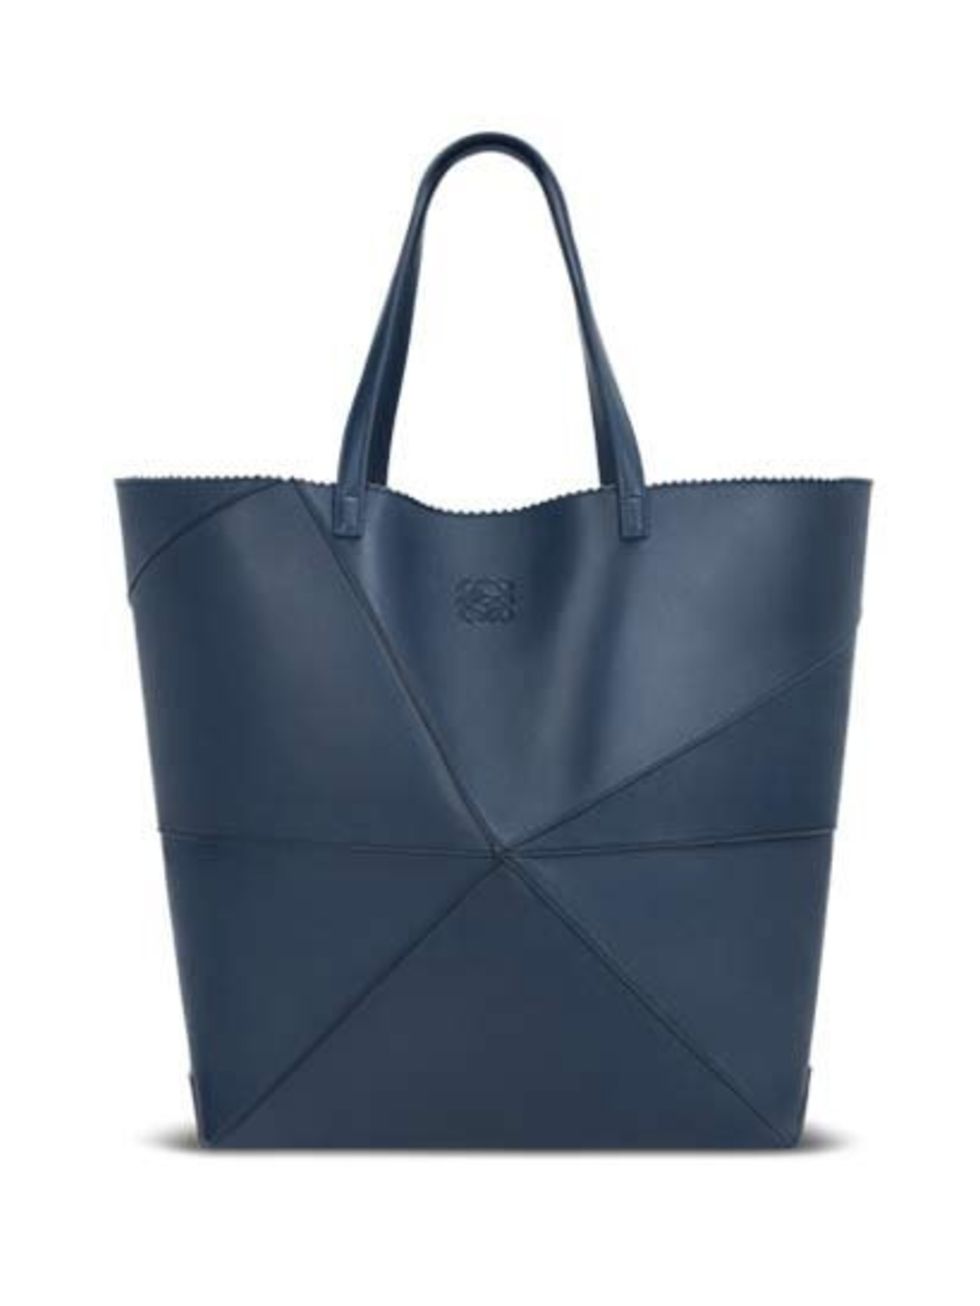 <p>Luxury brand Loewe certainly know their leather: their newest design is this stunning classic-with-a-twist Origami Vega tote.</p><p><a href="http://www.loewe.com/eu_en/women/womensbags.html">Loewe</a> bag, £1295</p>